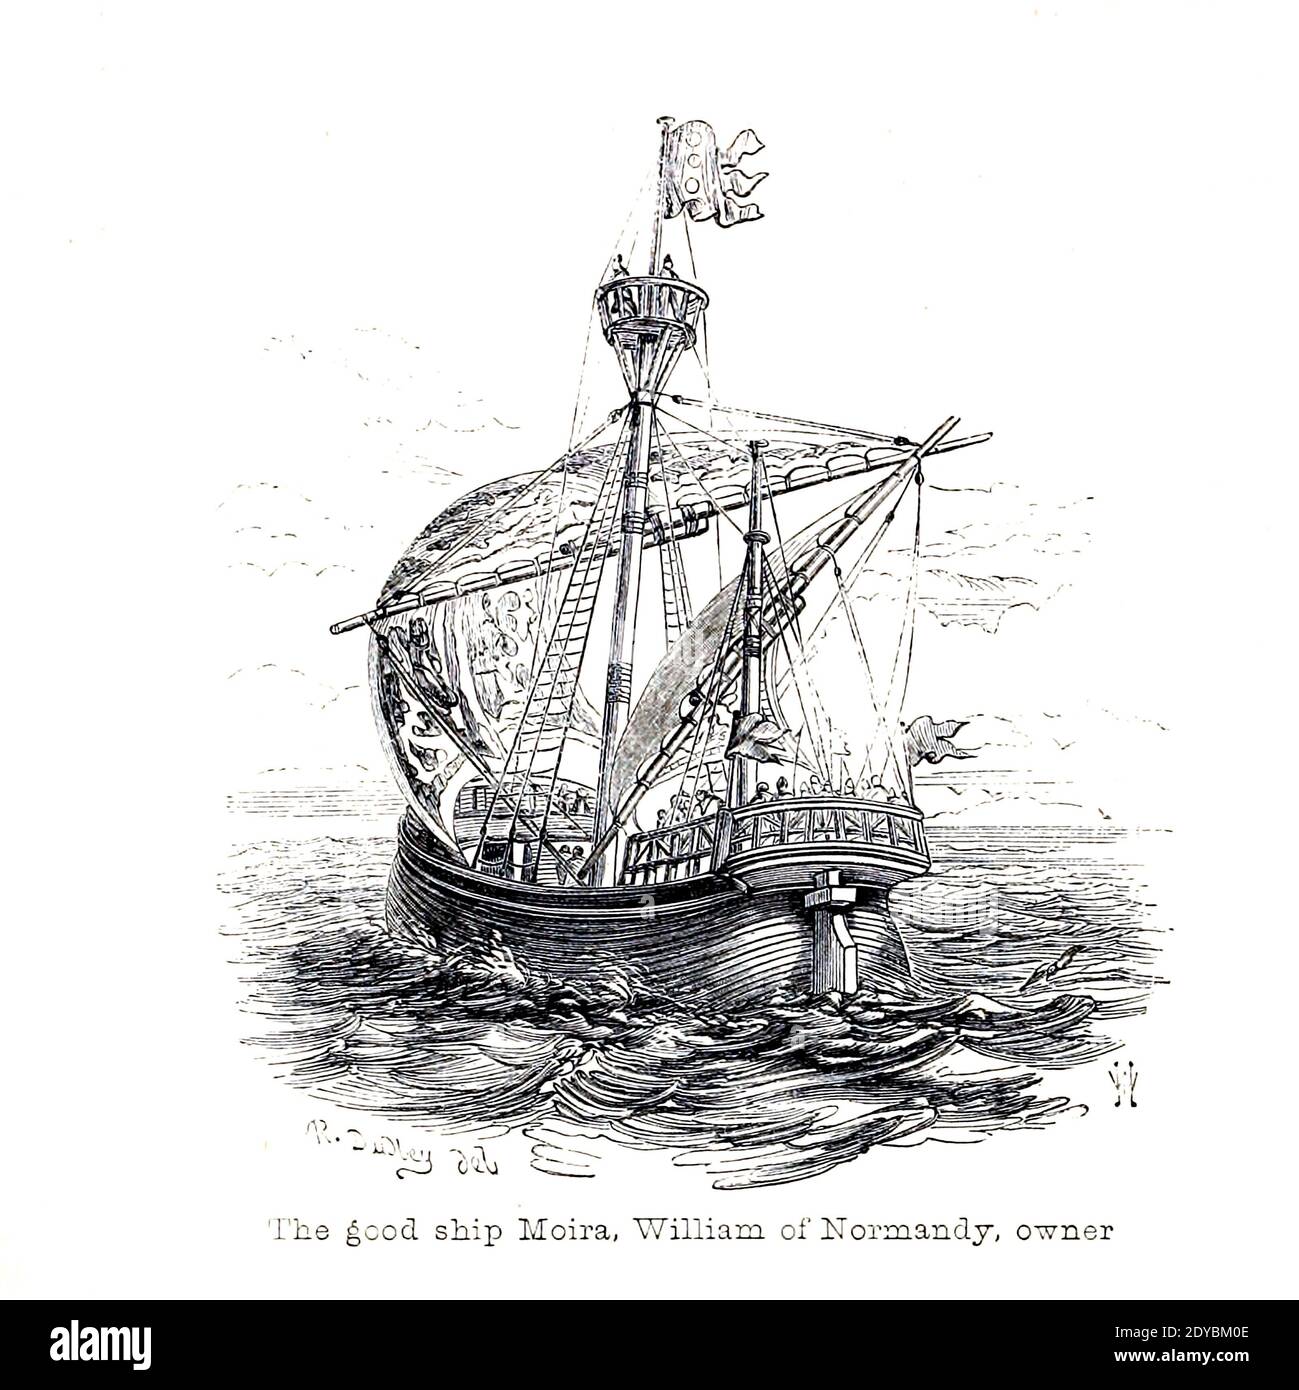 The good ship Moira, William of Normandy, owner From the Book 'Danes, Saxons and Normans : or, Stories of our ancestors' by Edgar, J. G. (John George), 1834-1864 Published in London in 1863 Stock Photo